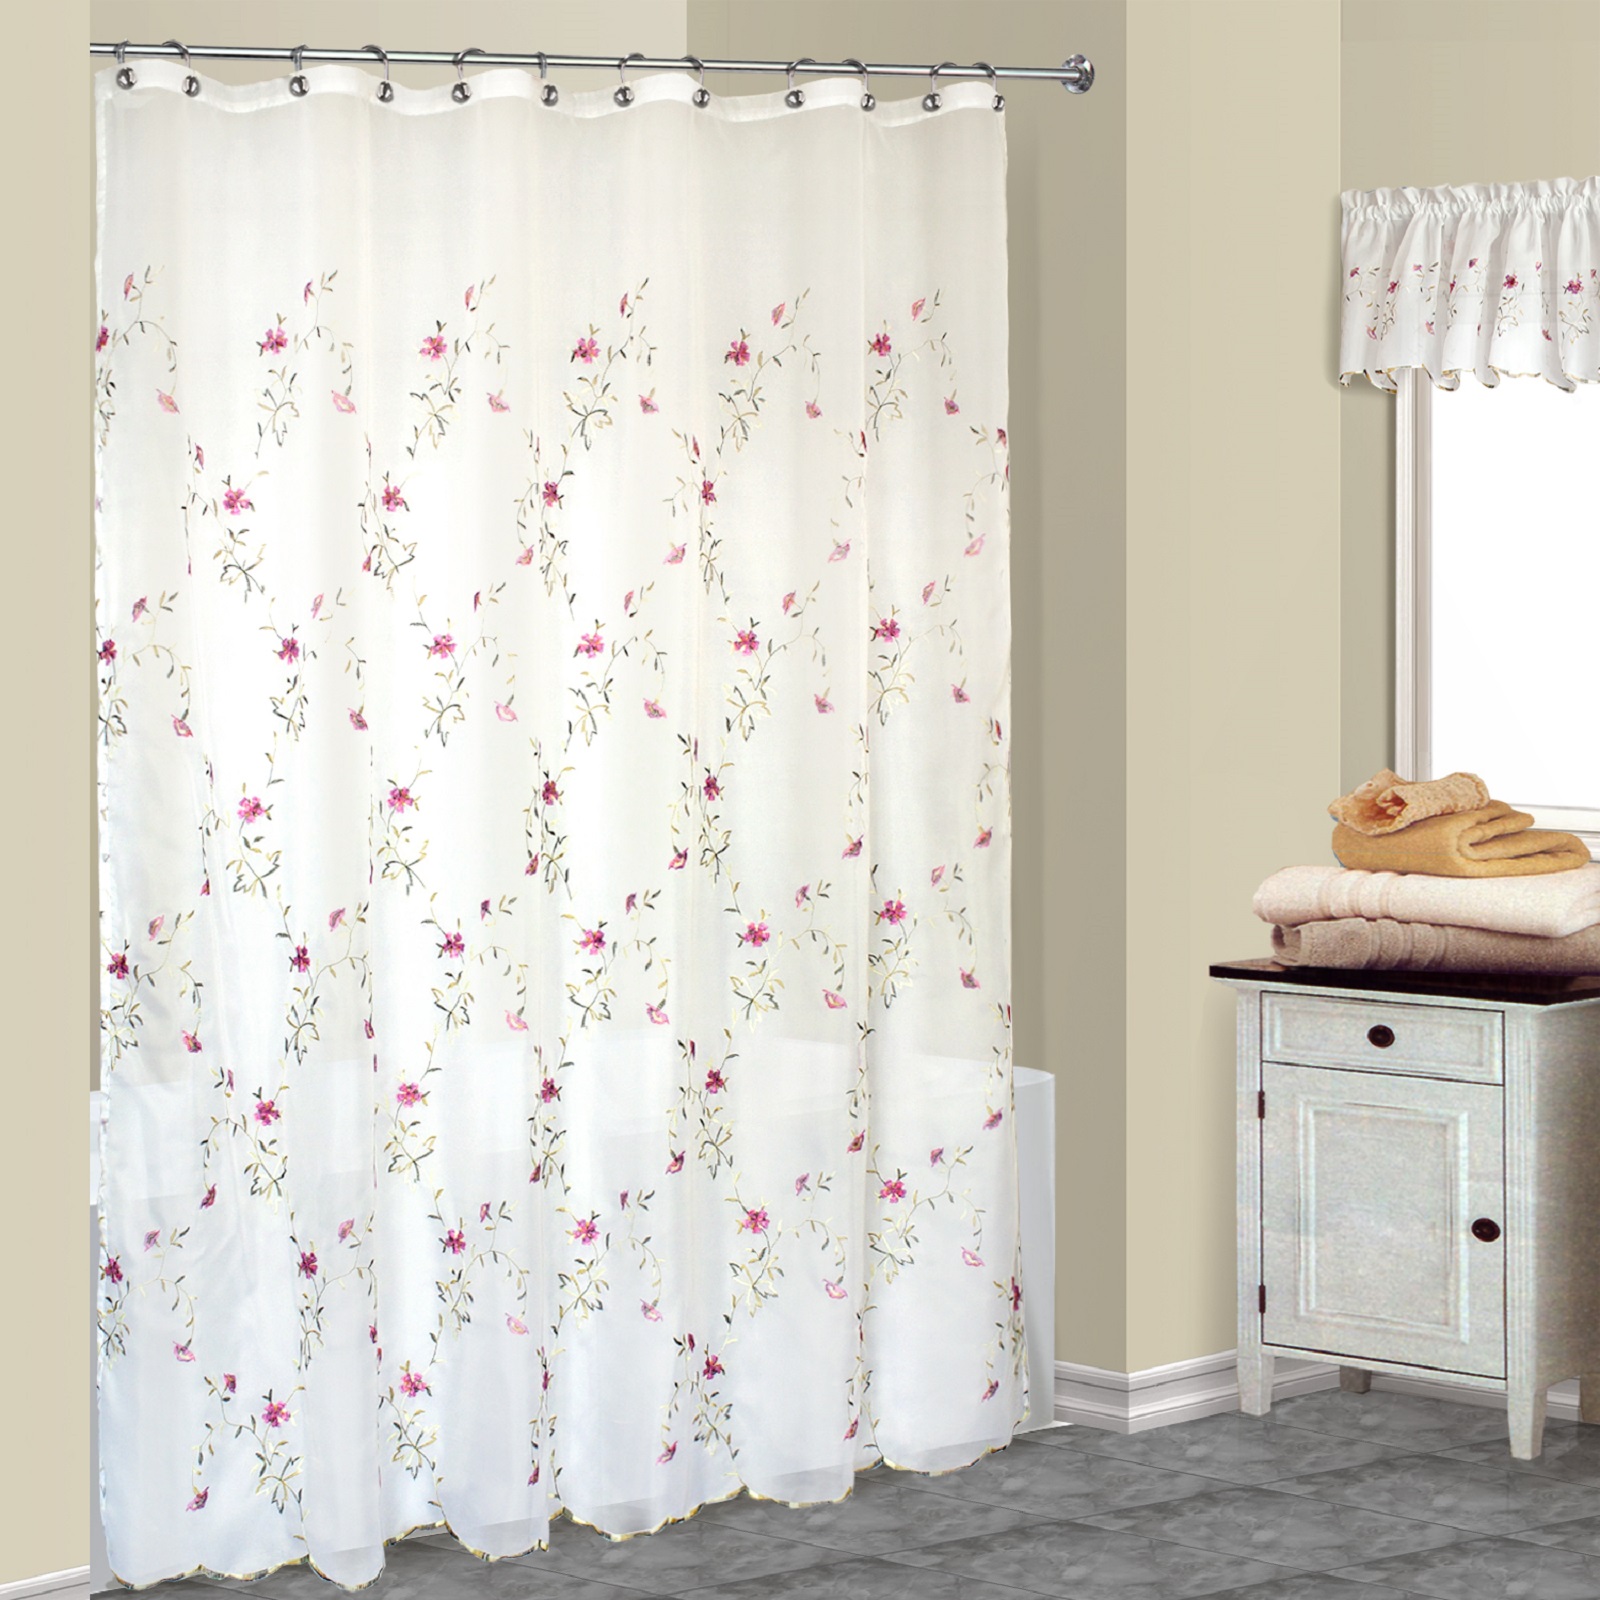 United Curtain Company "Loretta" Delicate Embroidered Sheer Voile Floral Free Standing Shower Curtain